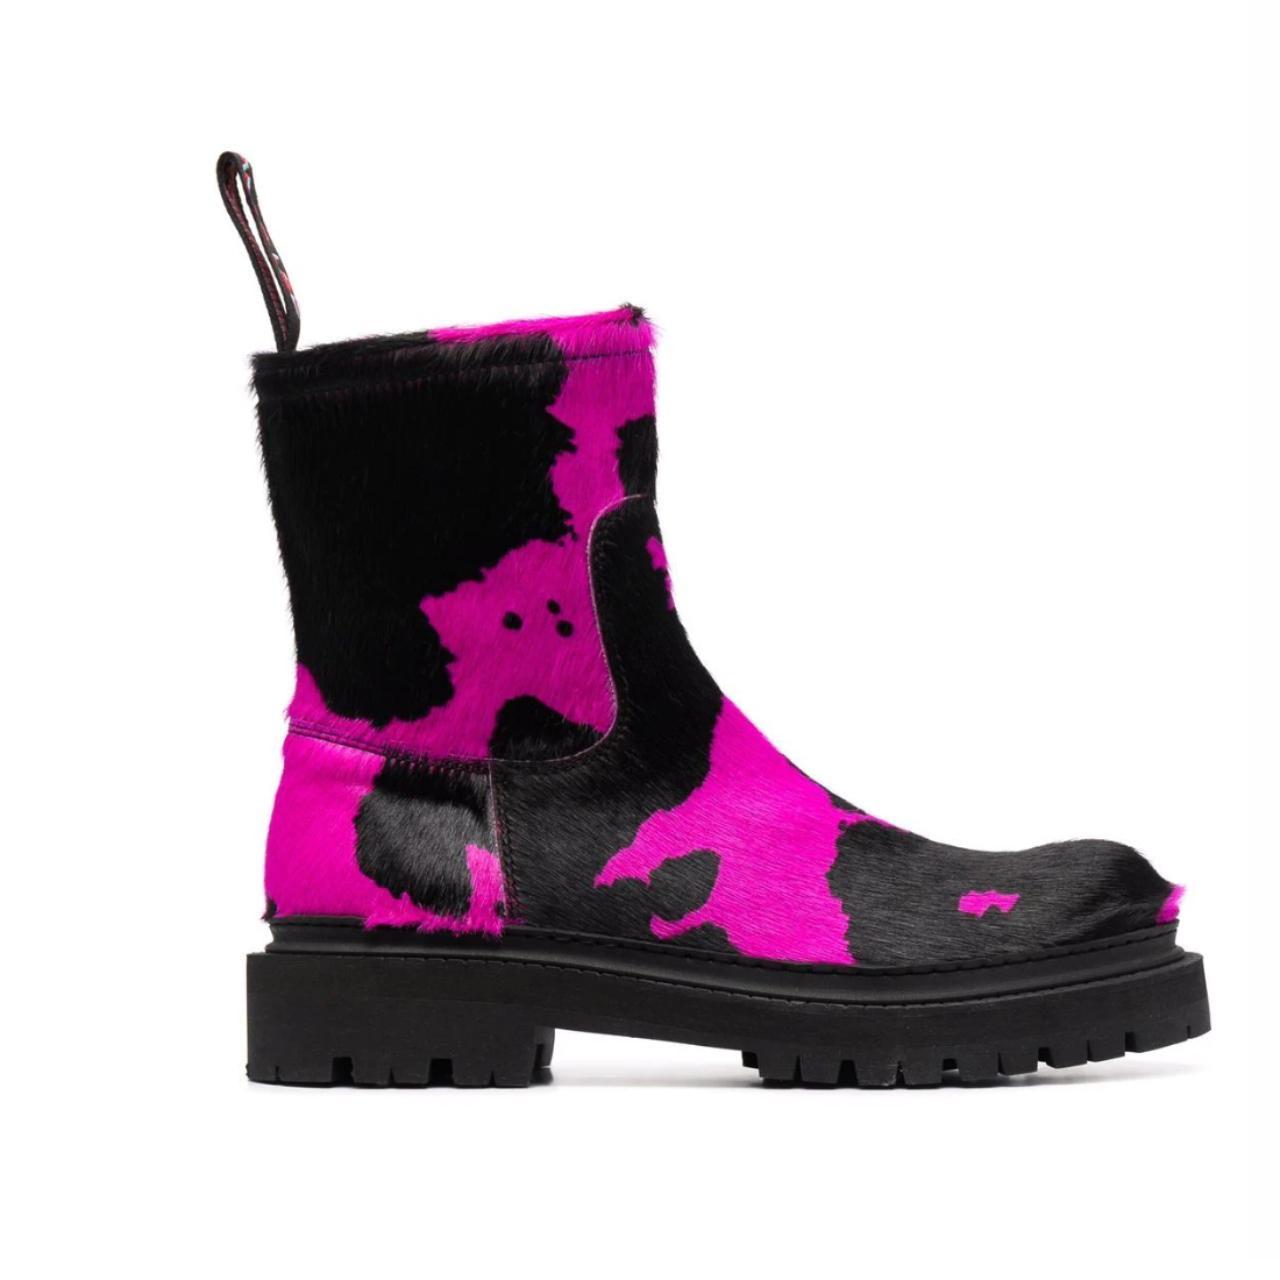 CamperLab Women's Pink and Black Boots (4)